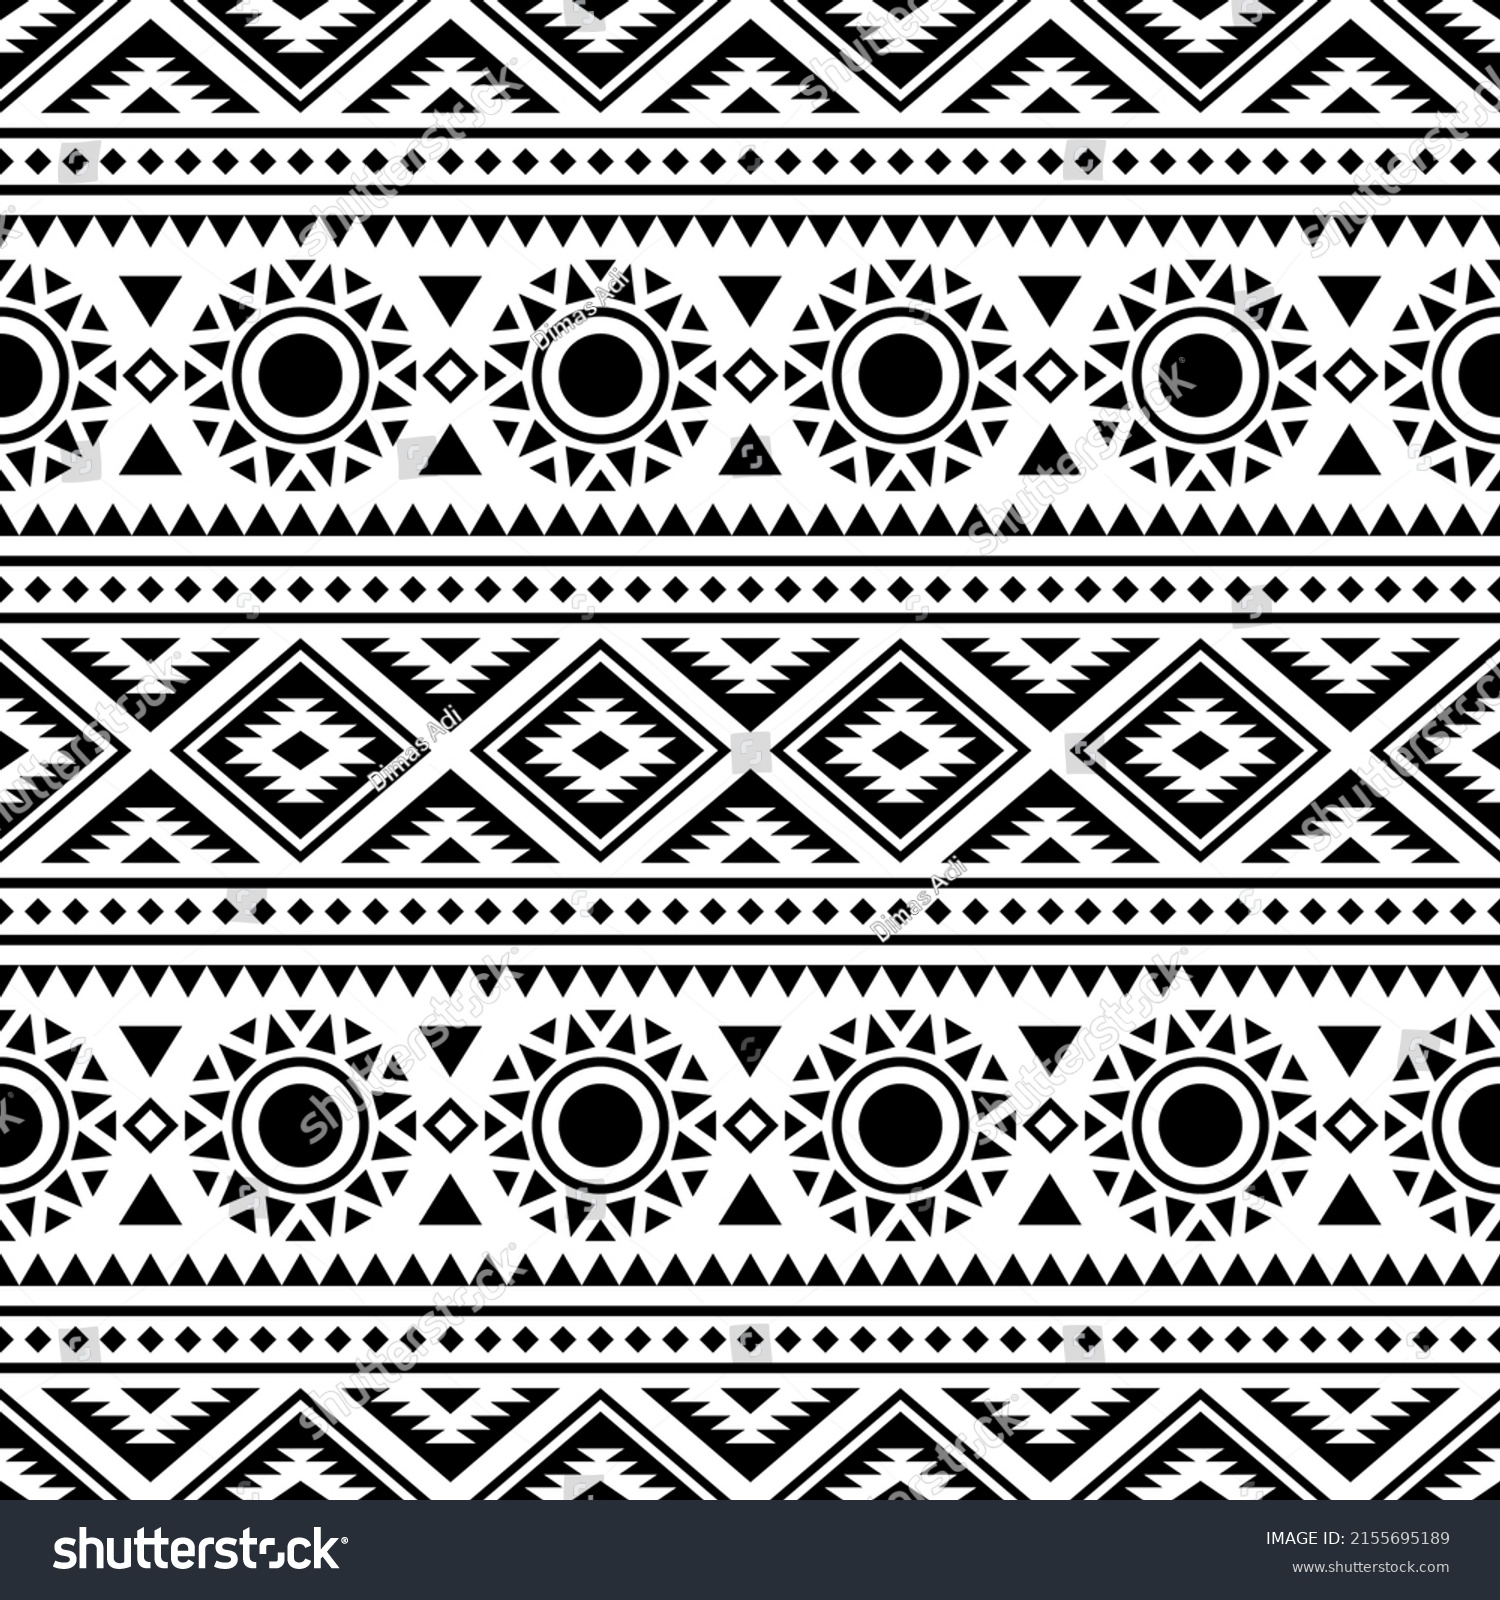 Traditional Aztec Seamless Ethnic Pattern Texture Stock Vector (Royalty ...